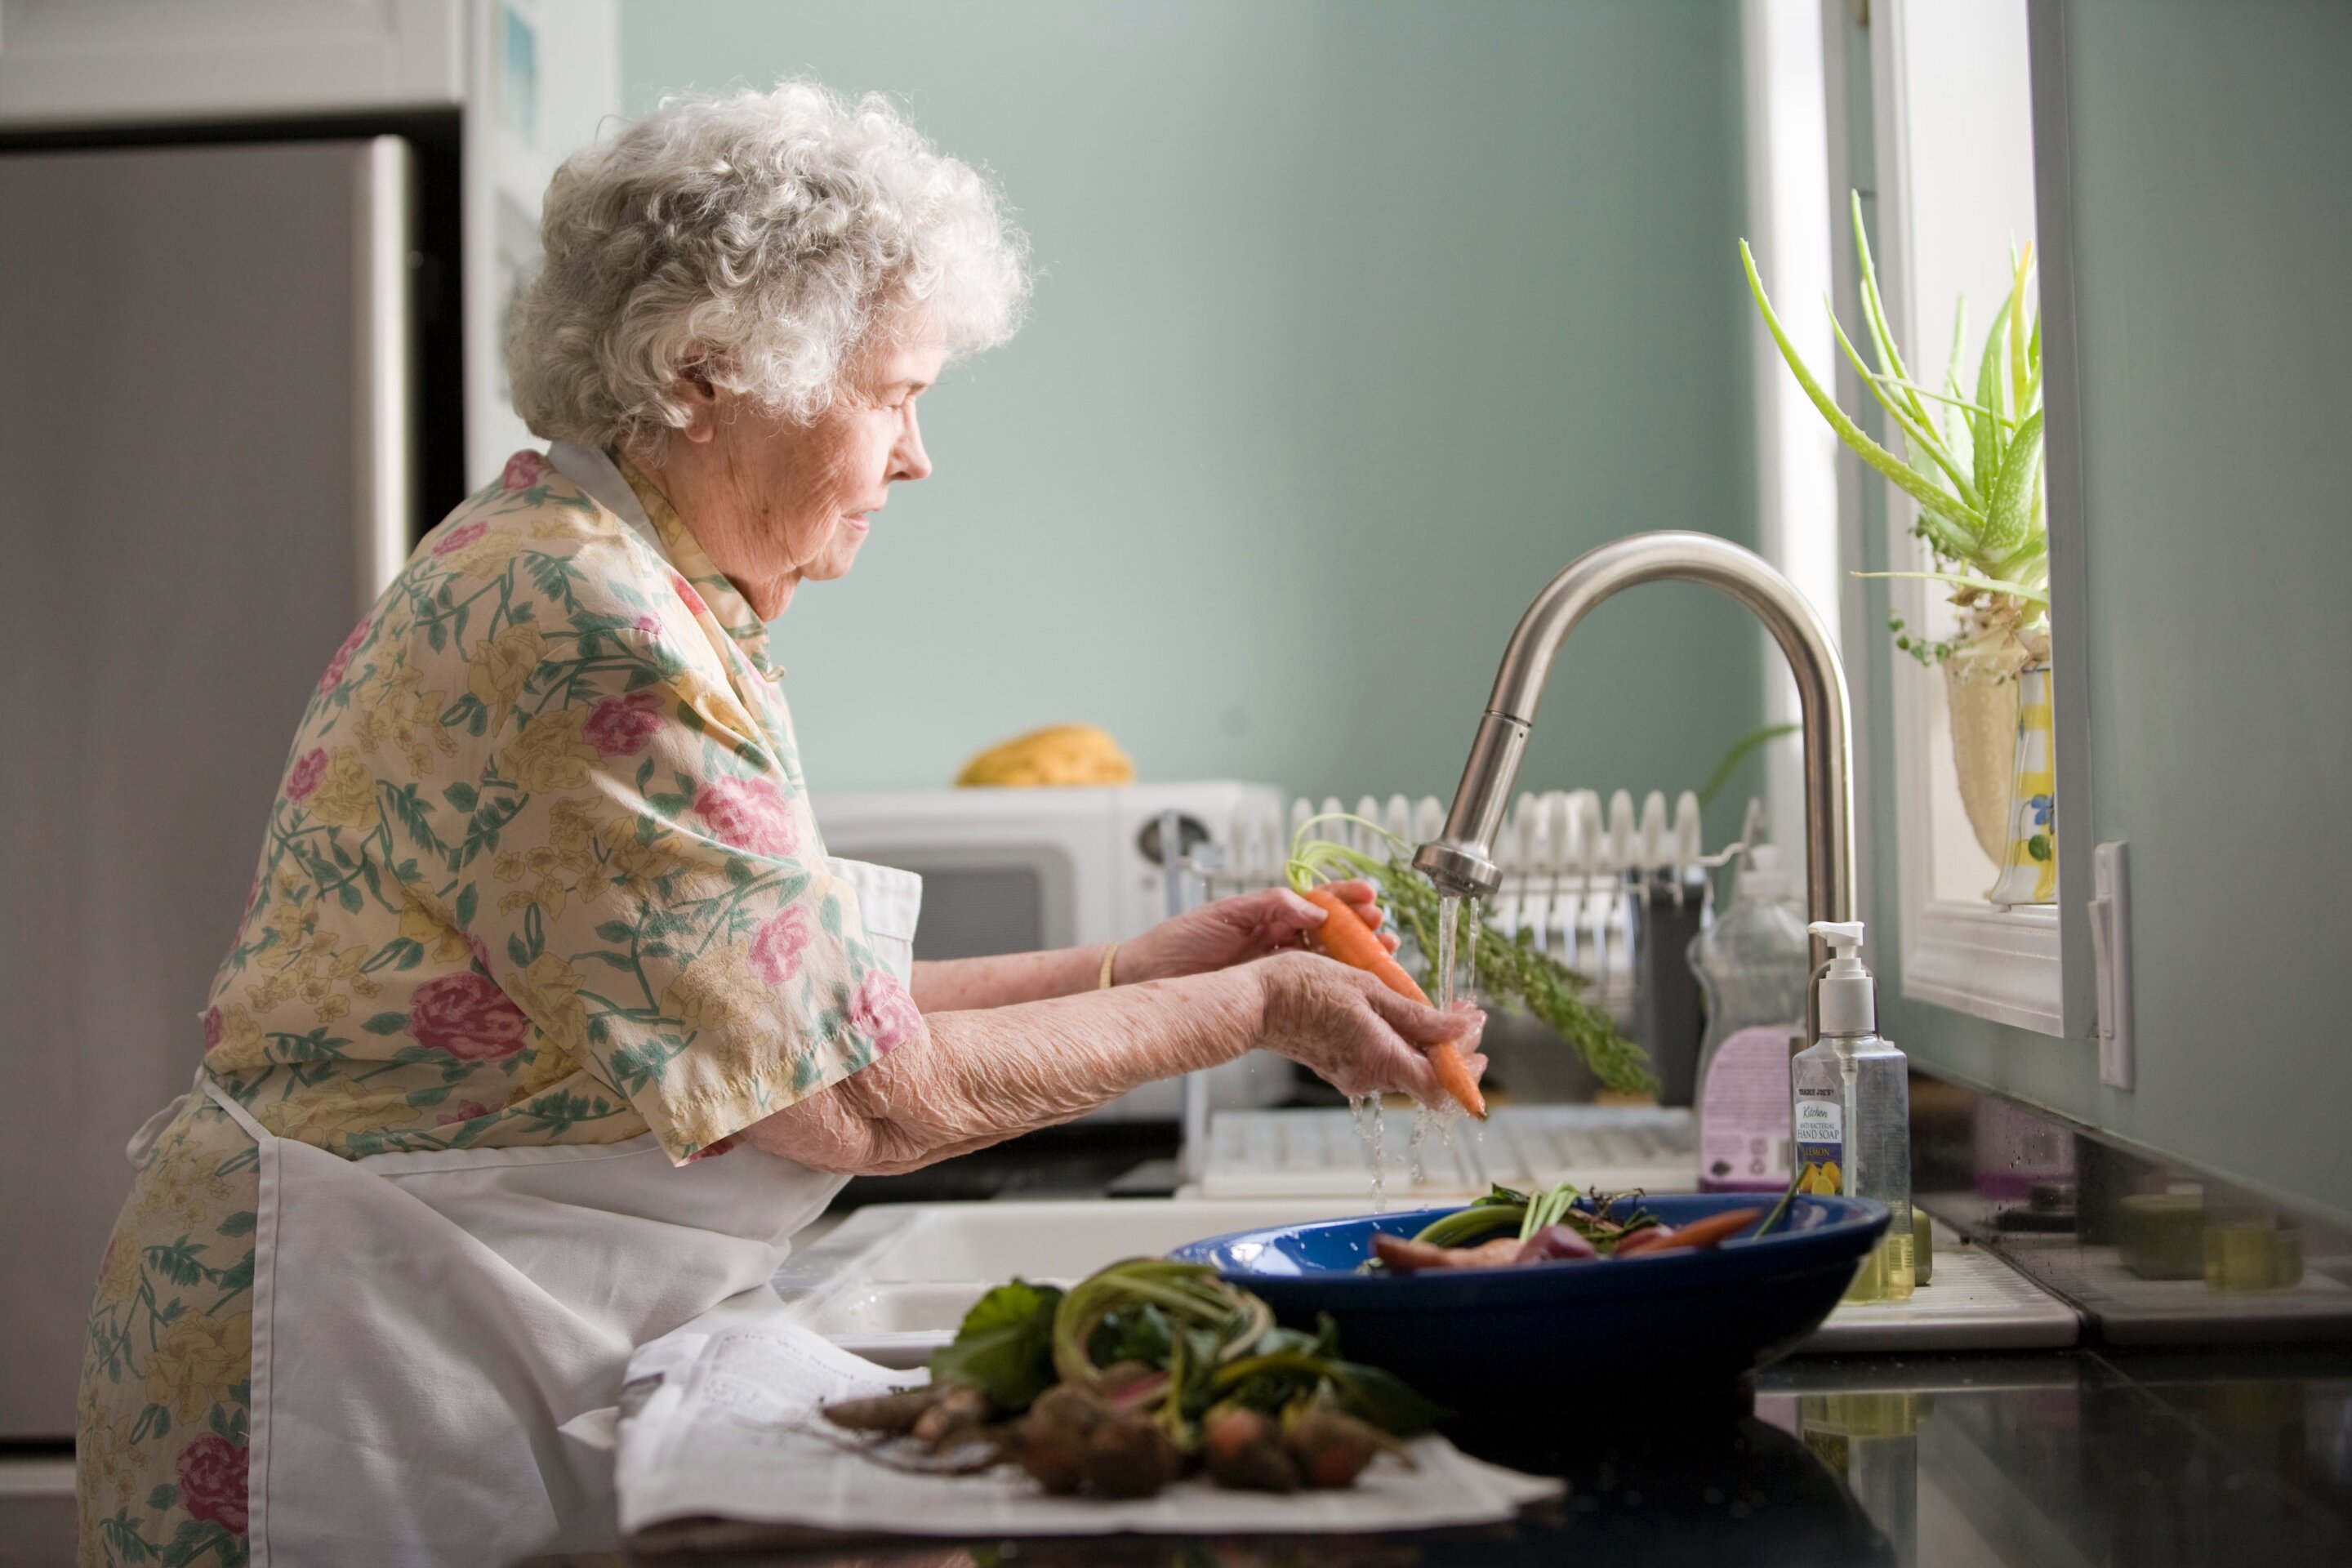 #Food insecurity may increase cognitive decline in older adults